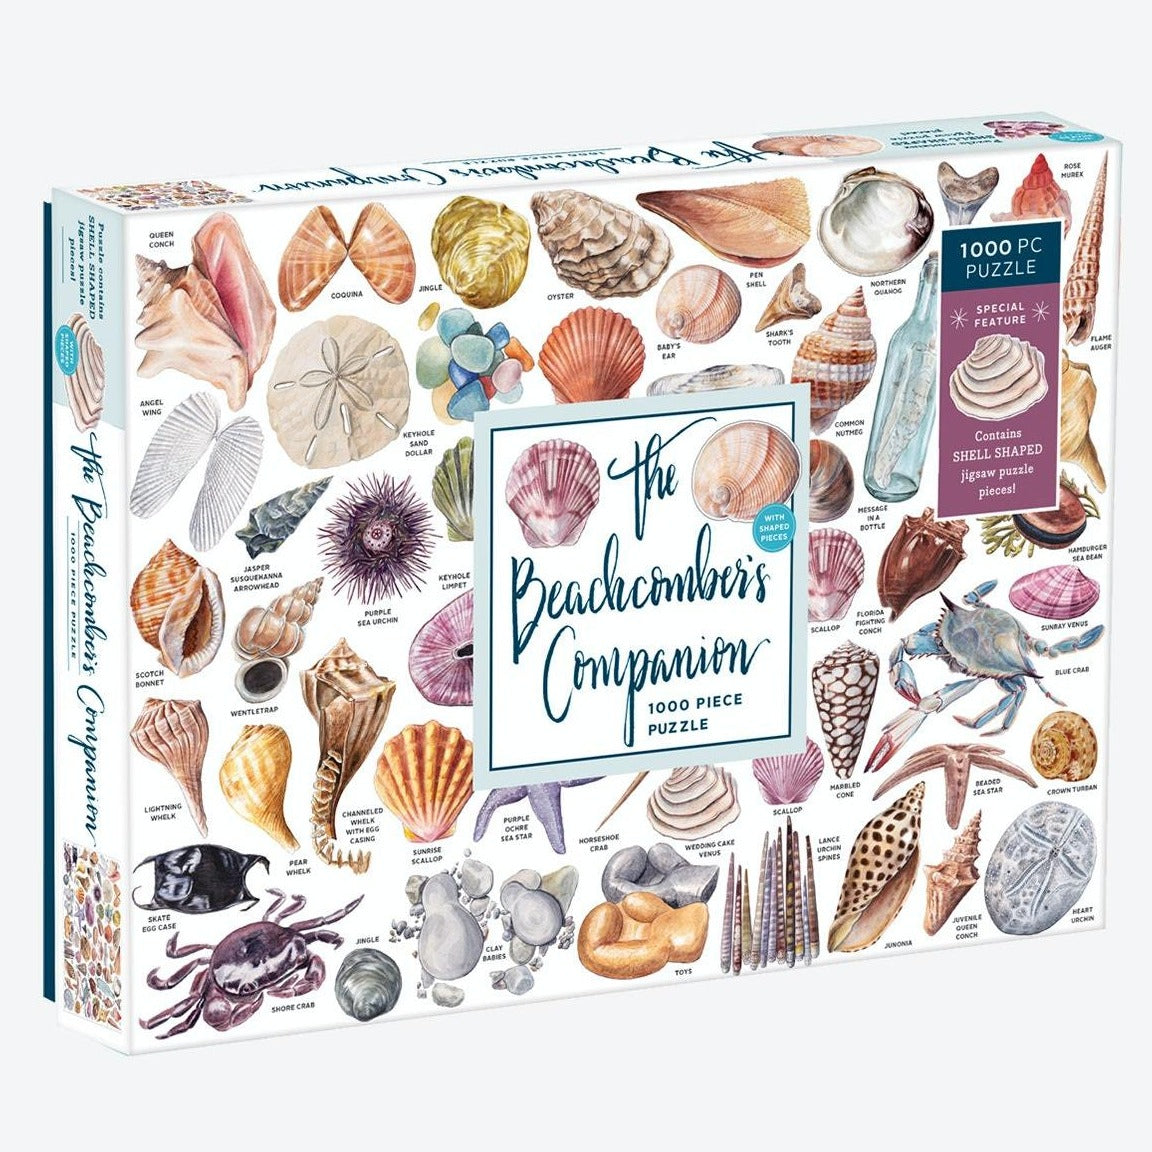 The Beachcomber's Companion puzzle, front of box